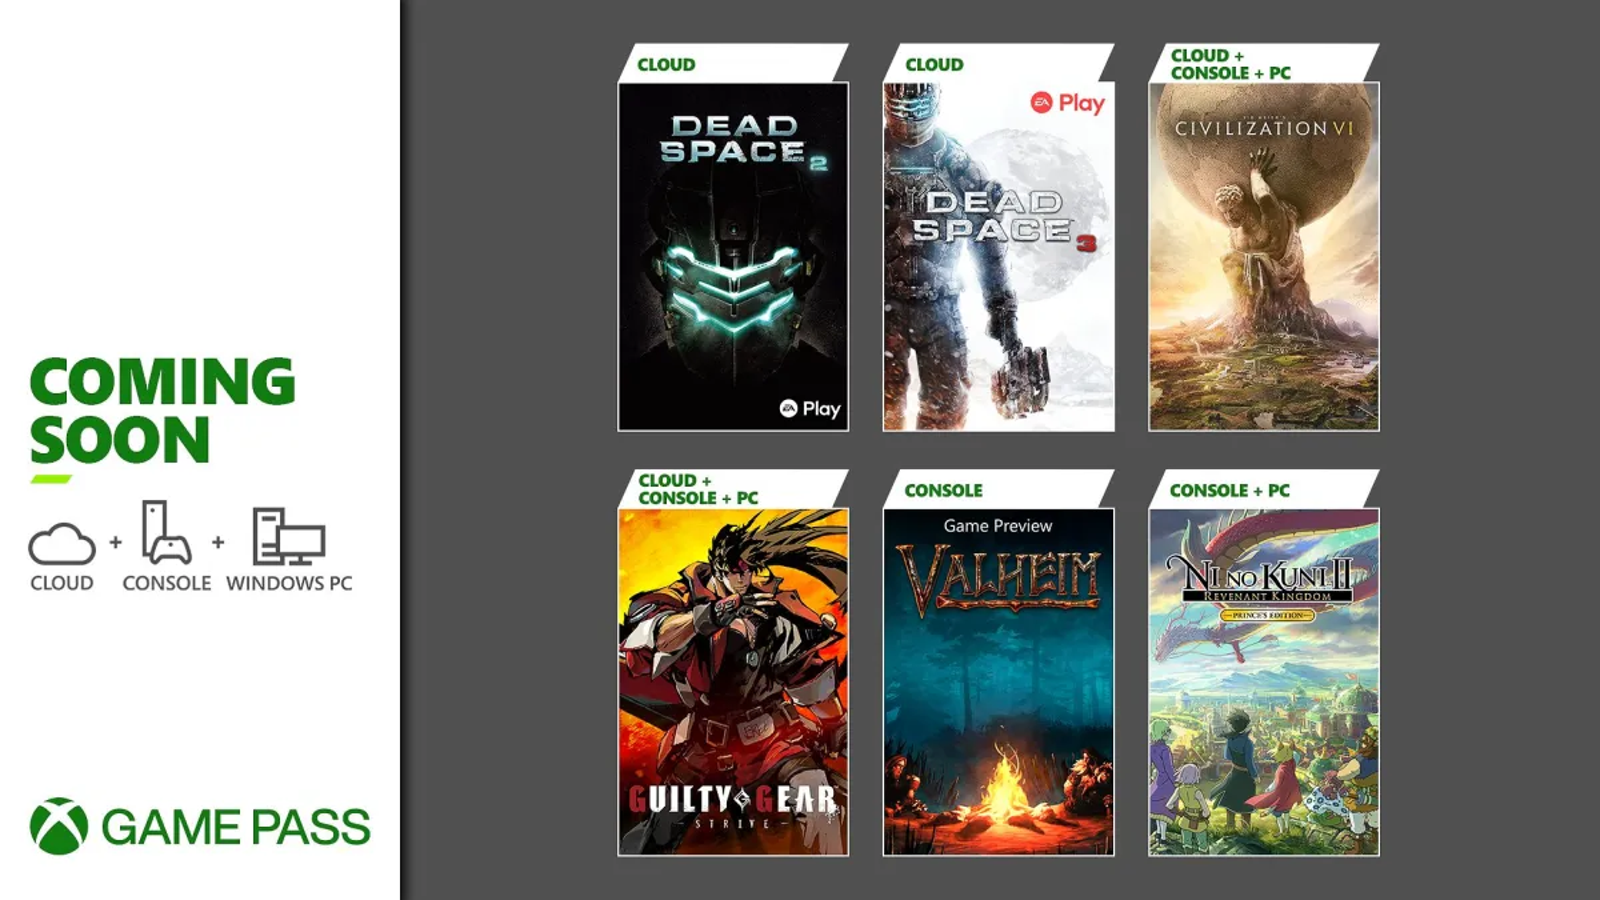 Xbox Game Pass games for March revealed